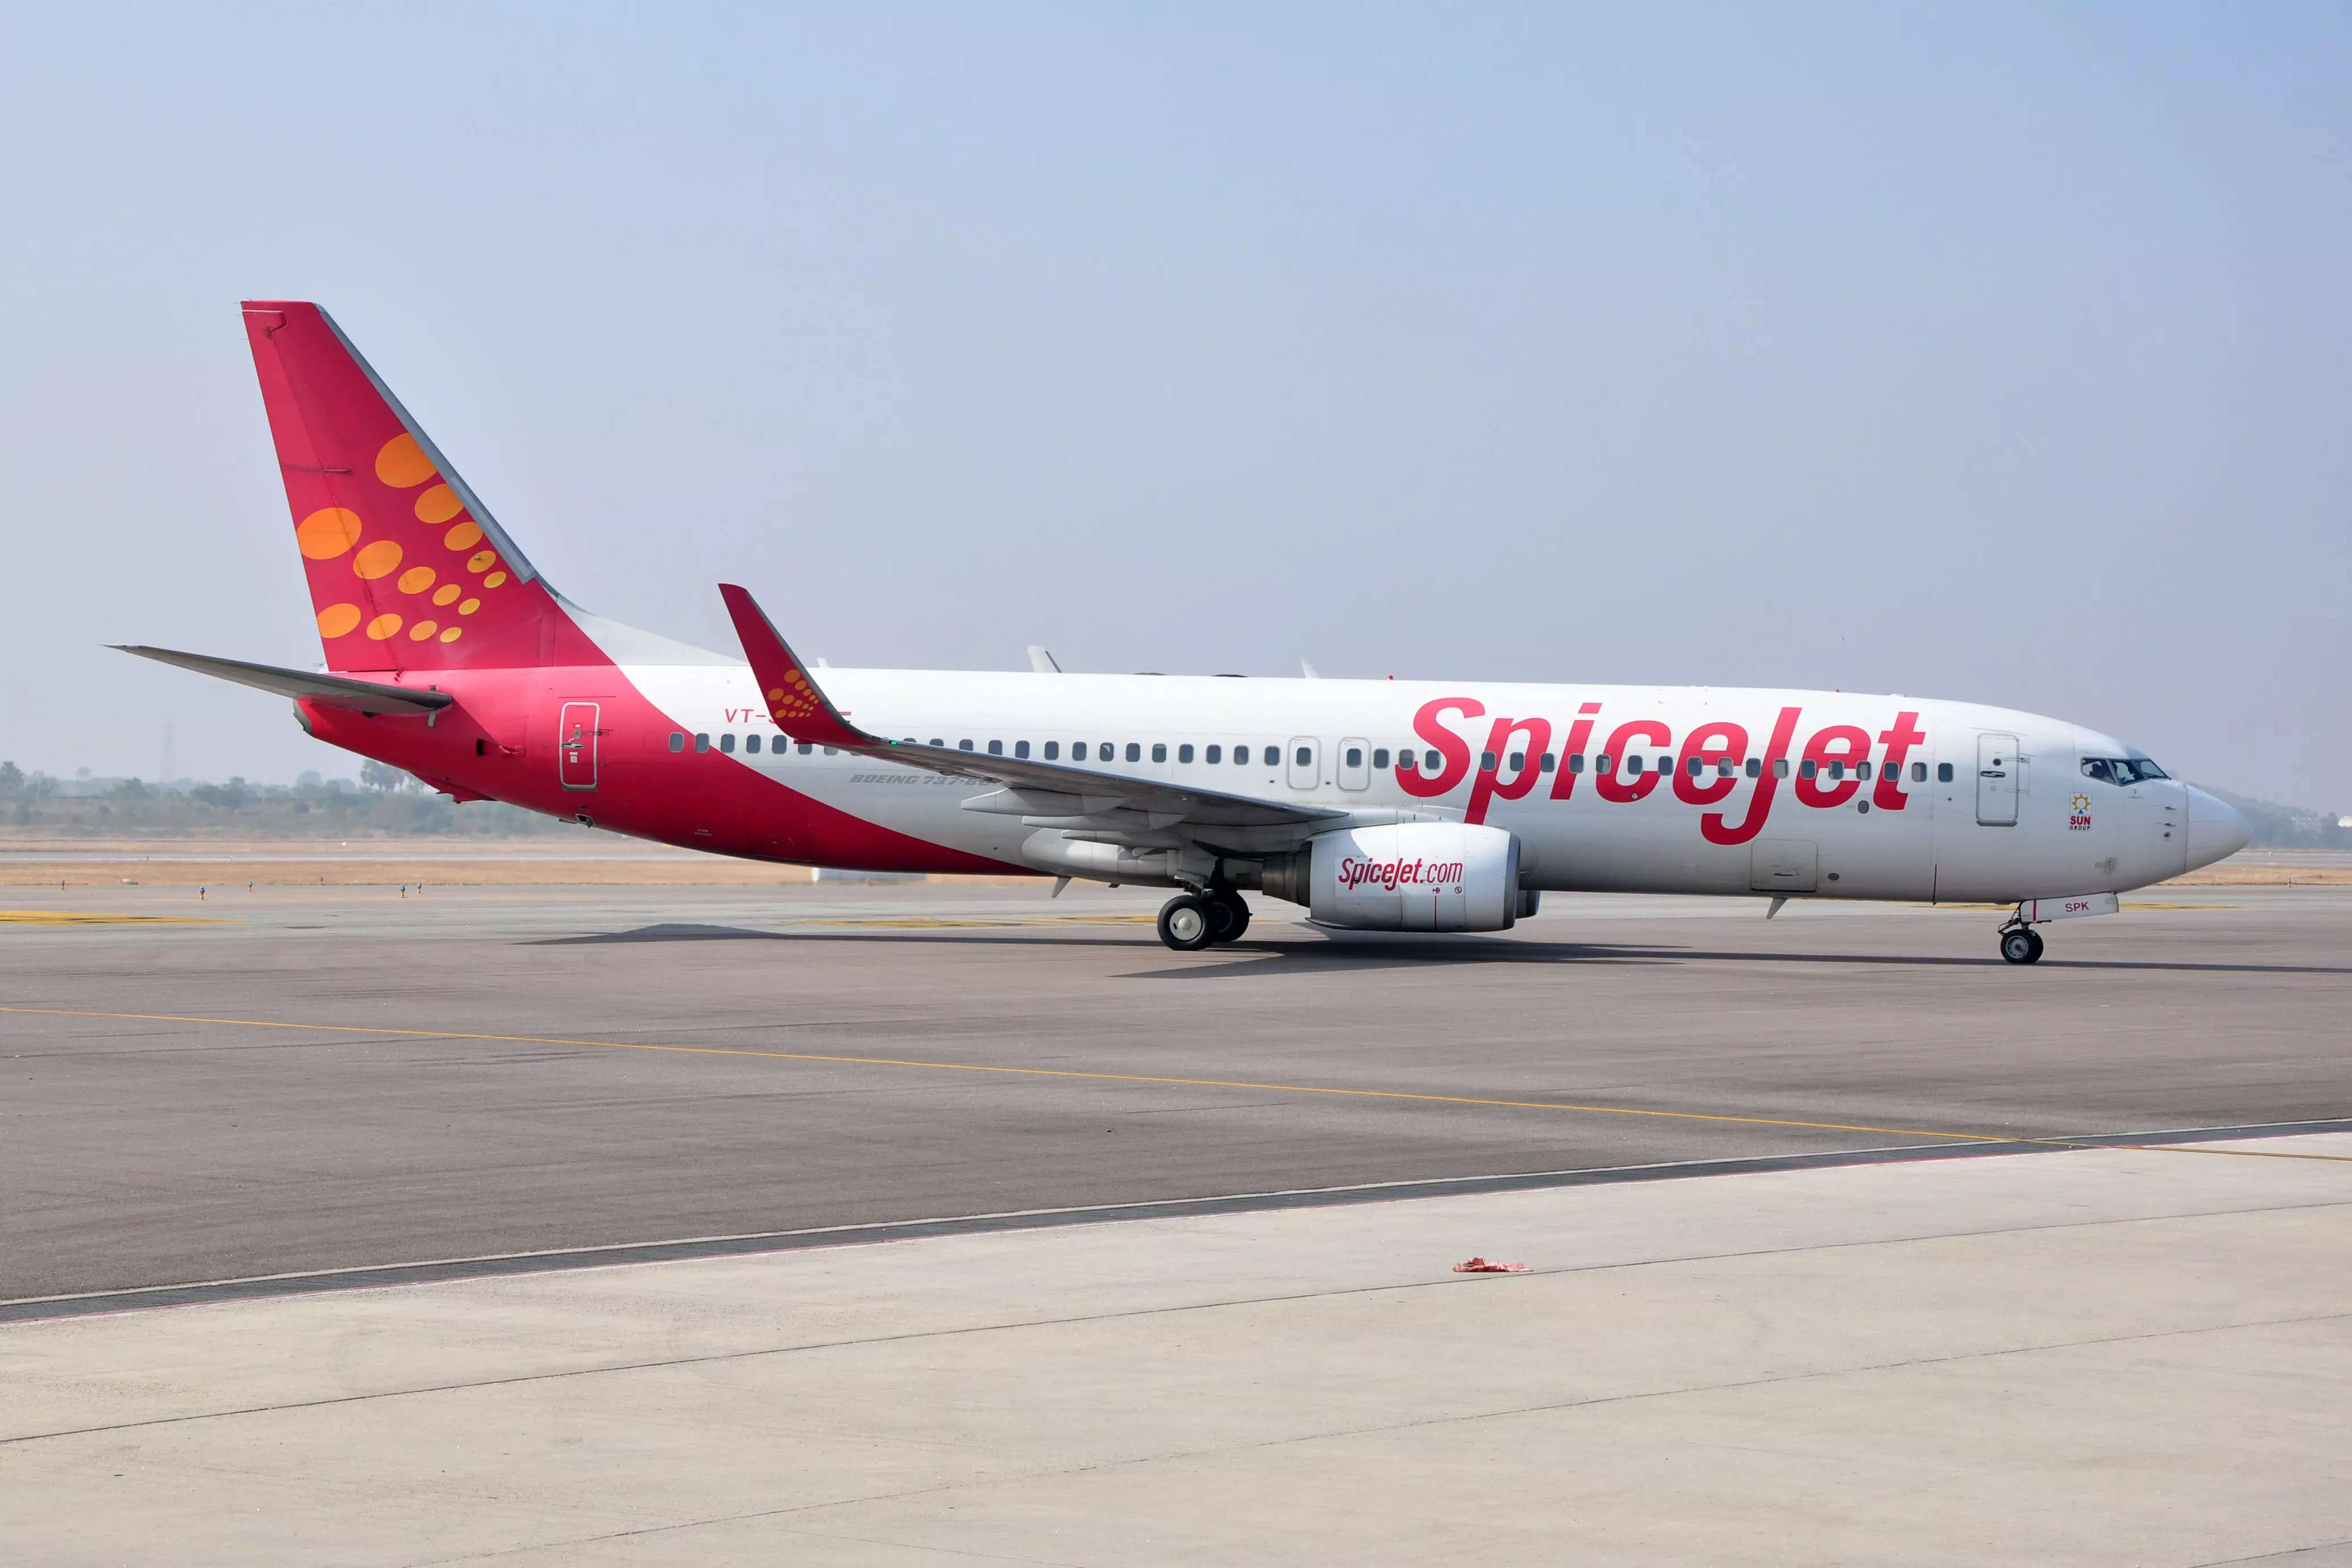 SpiceJet to operate 10 flights with an all-women crew to celebrate International Women’s Day